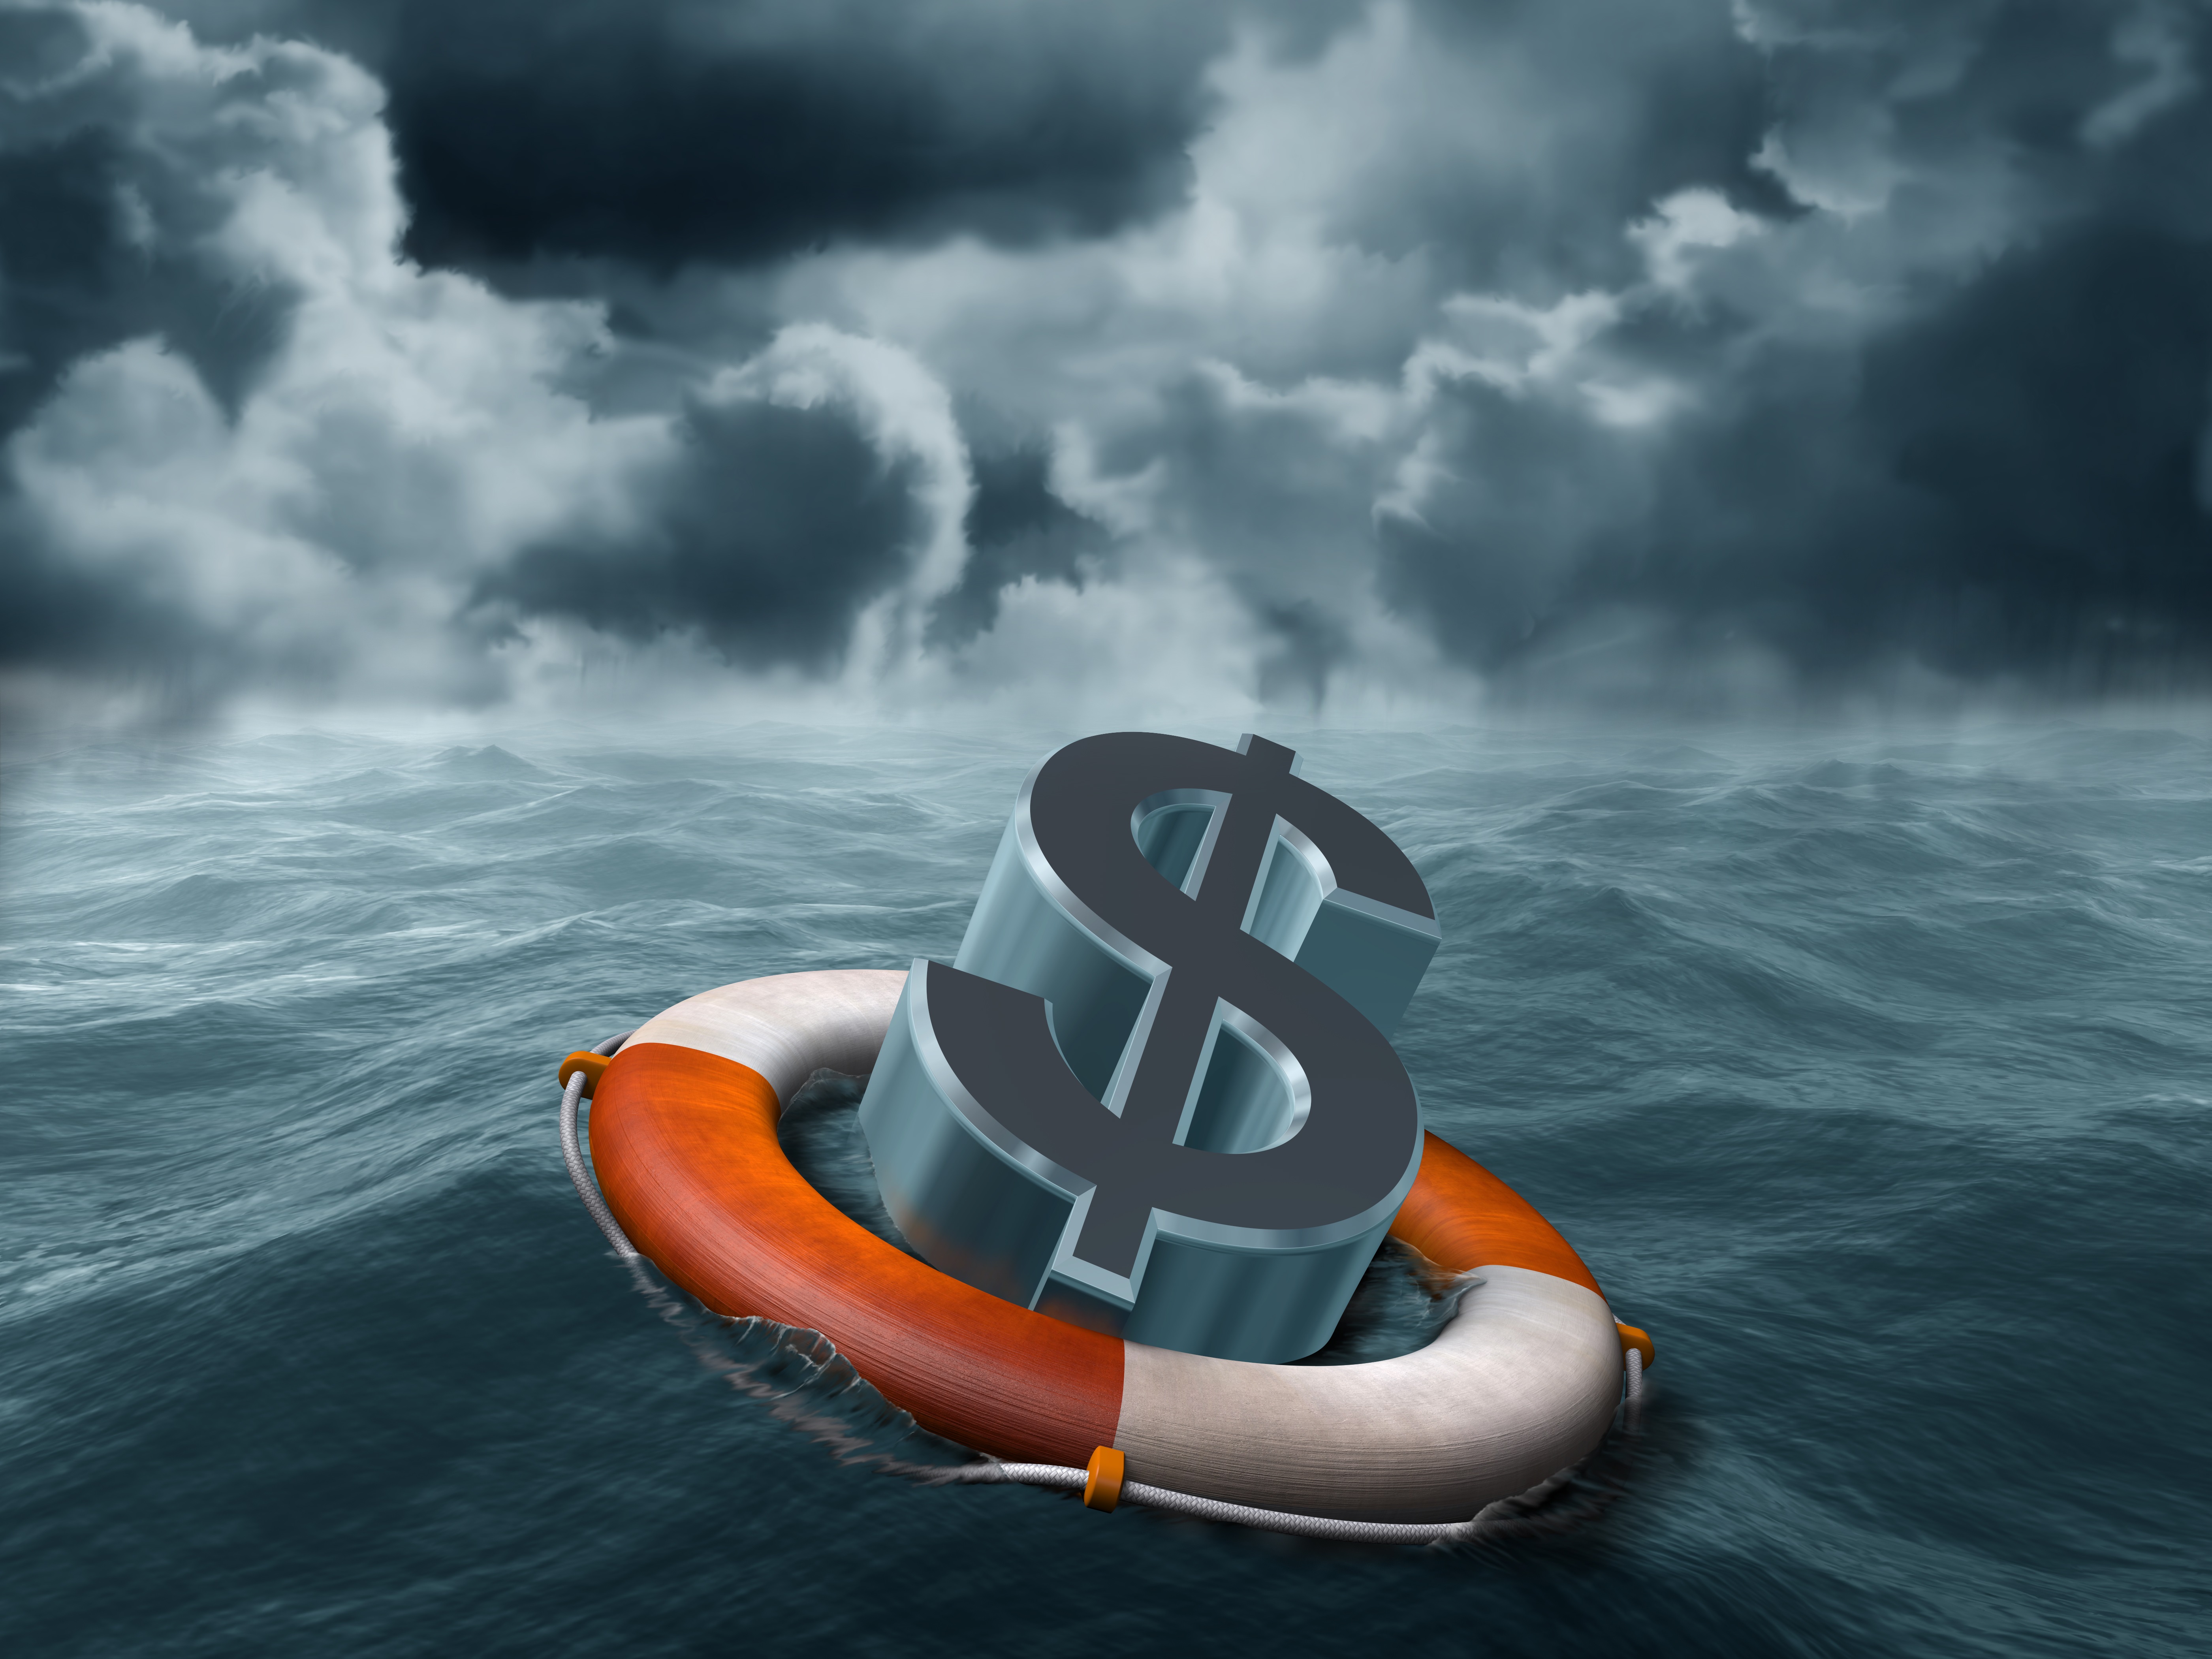 A steel gray dollar sign, accented with air force blue, floats on a weathered orange and white life raft amidst troubled waters with the stormy sky above.